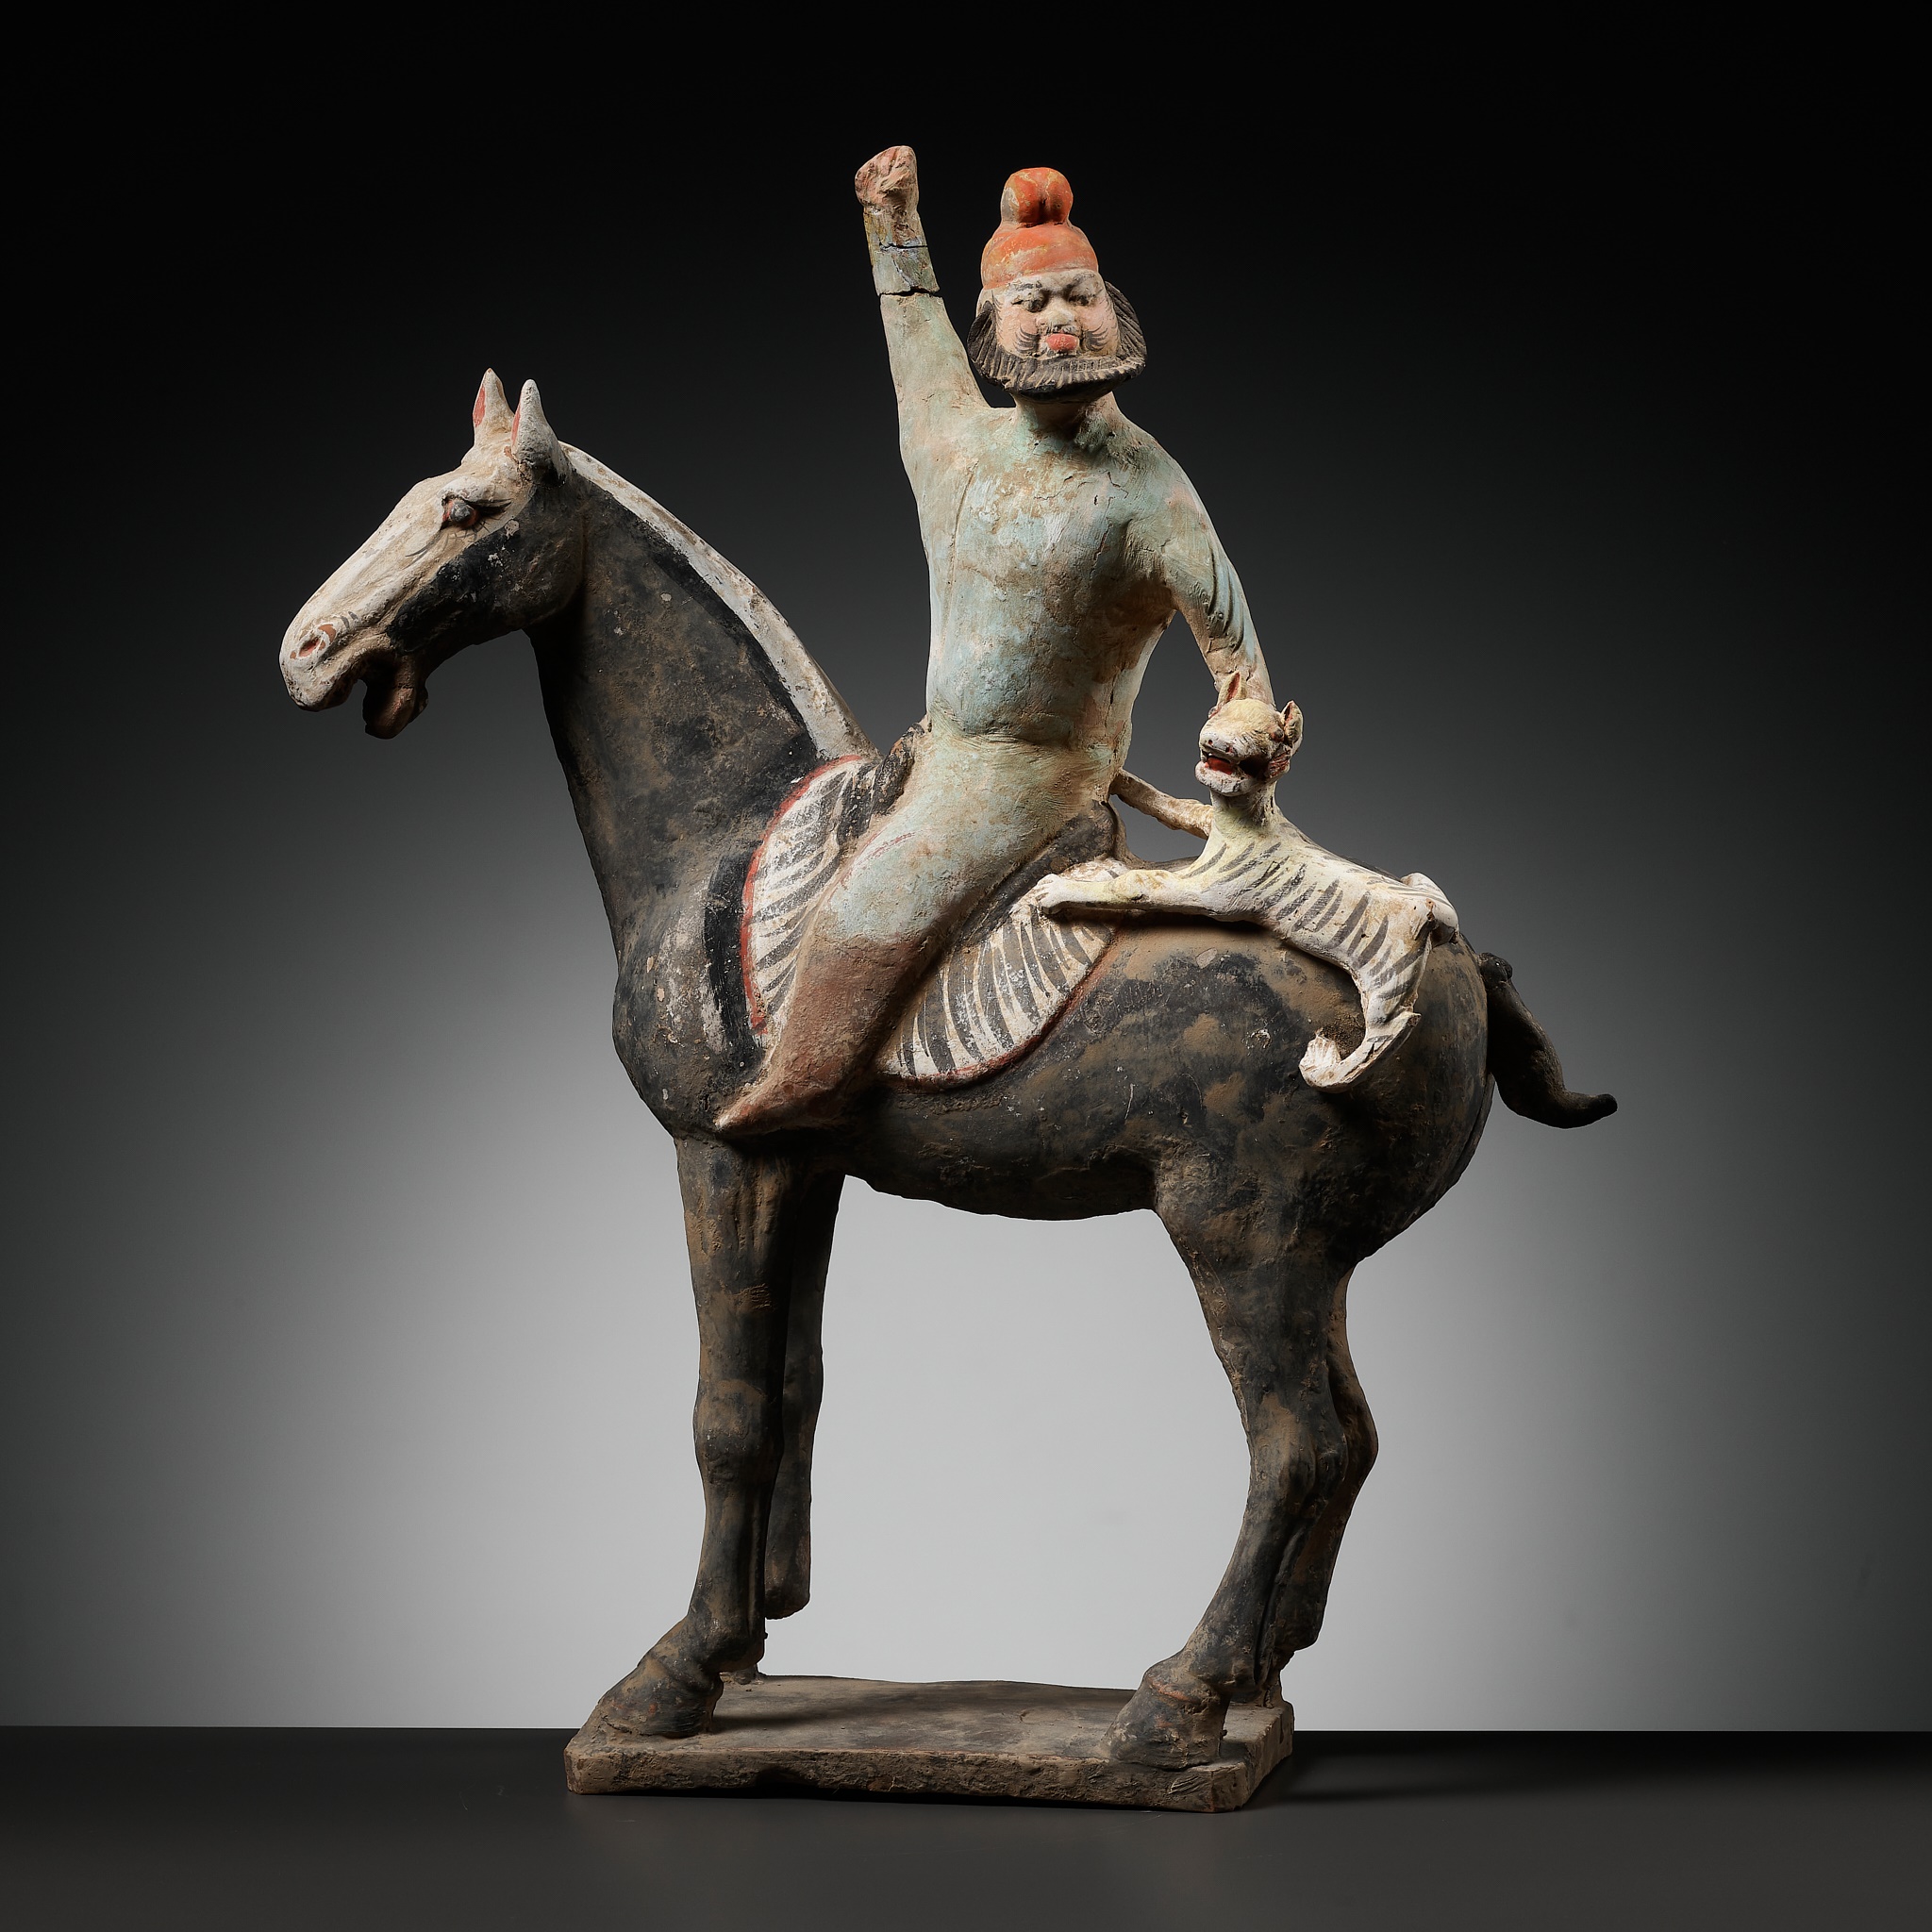 A RARE PAINTED POTTERY HORSE WITH A 'PHRYGIAN' RIDER AND TIGER CUB, TANG DYNASTY